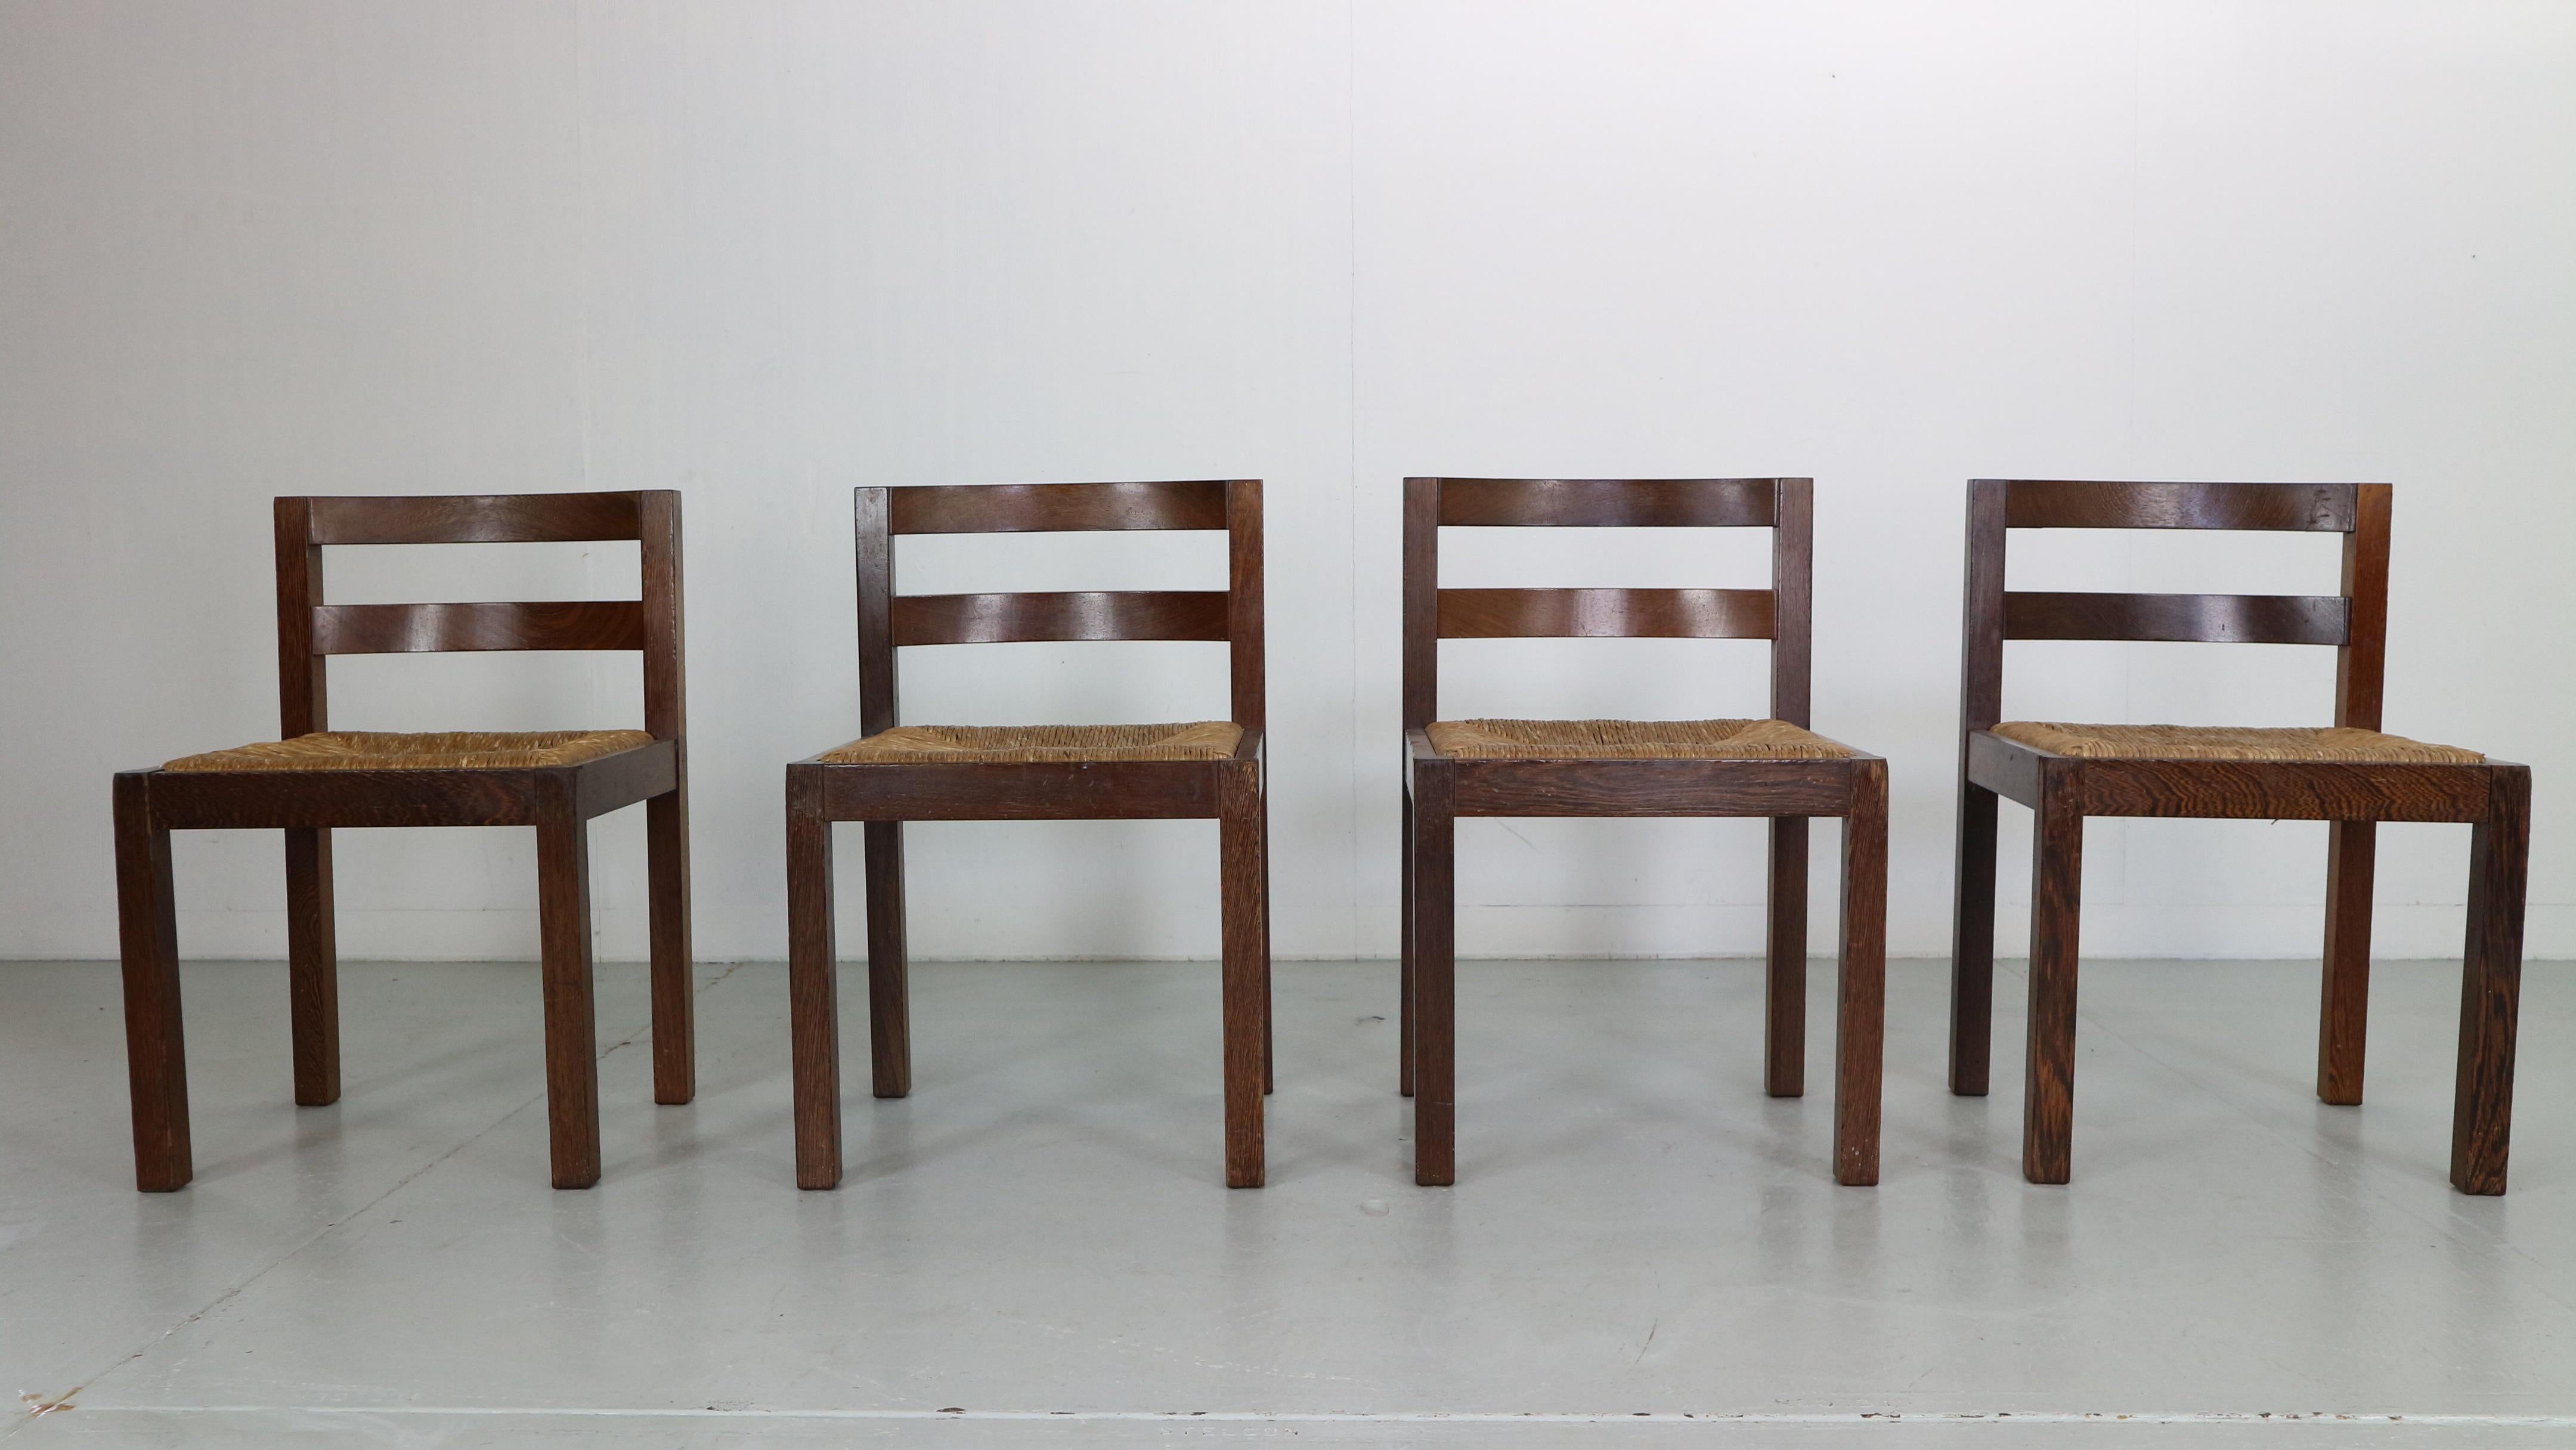 Mid- Century modern period very famous Dutch furniture designer Martin Visser designed these chairs for t' Spectrum in 1960s period, Netherlands.

The set of 4 chairs are in a great original condition.
Made of rattan seating and solid wenge